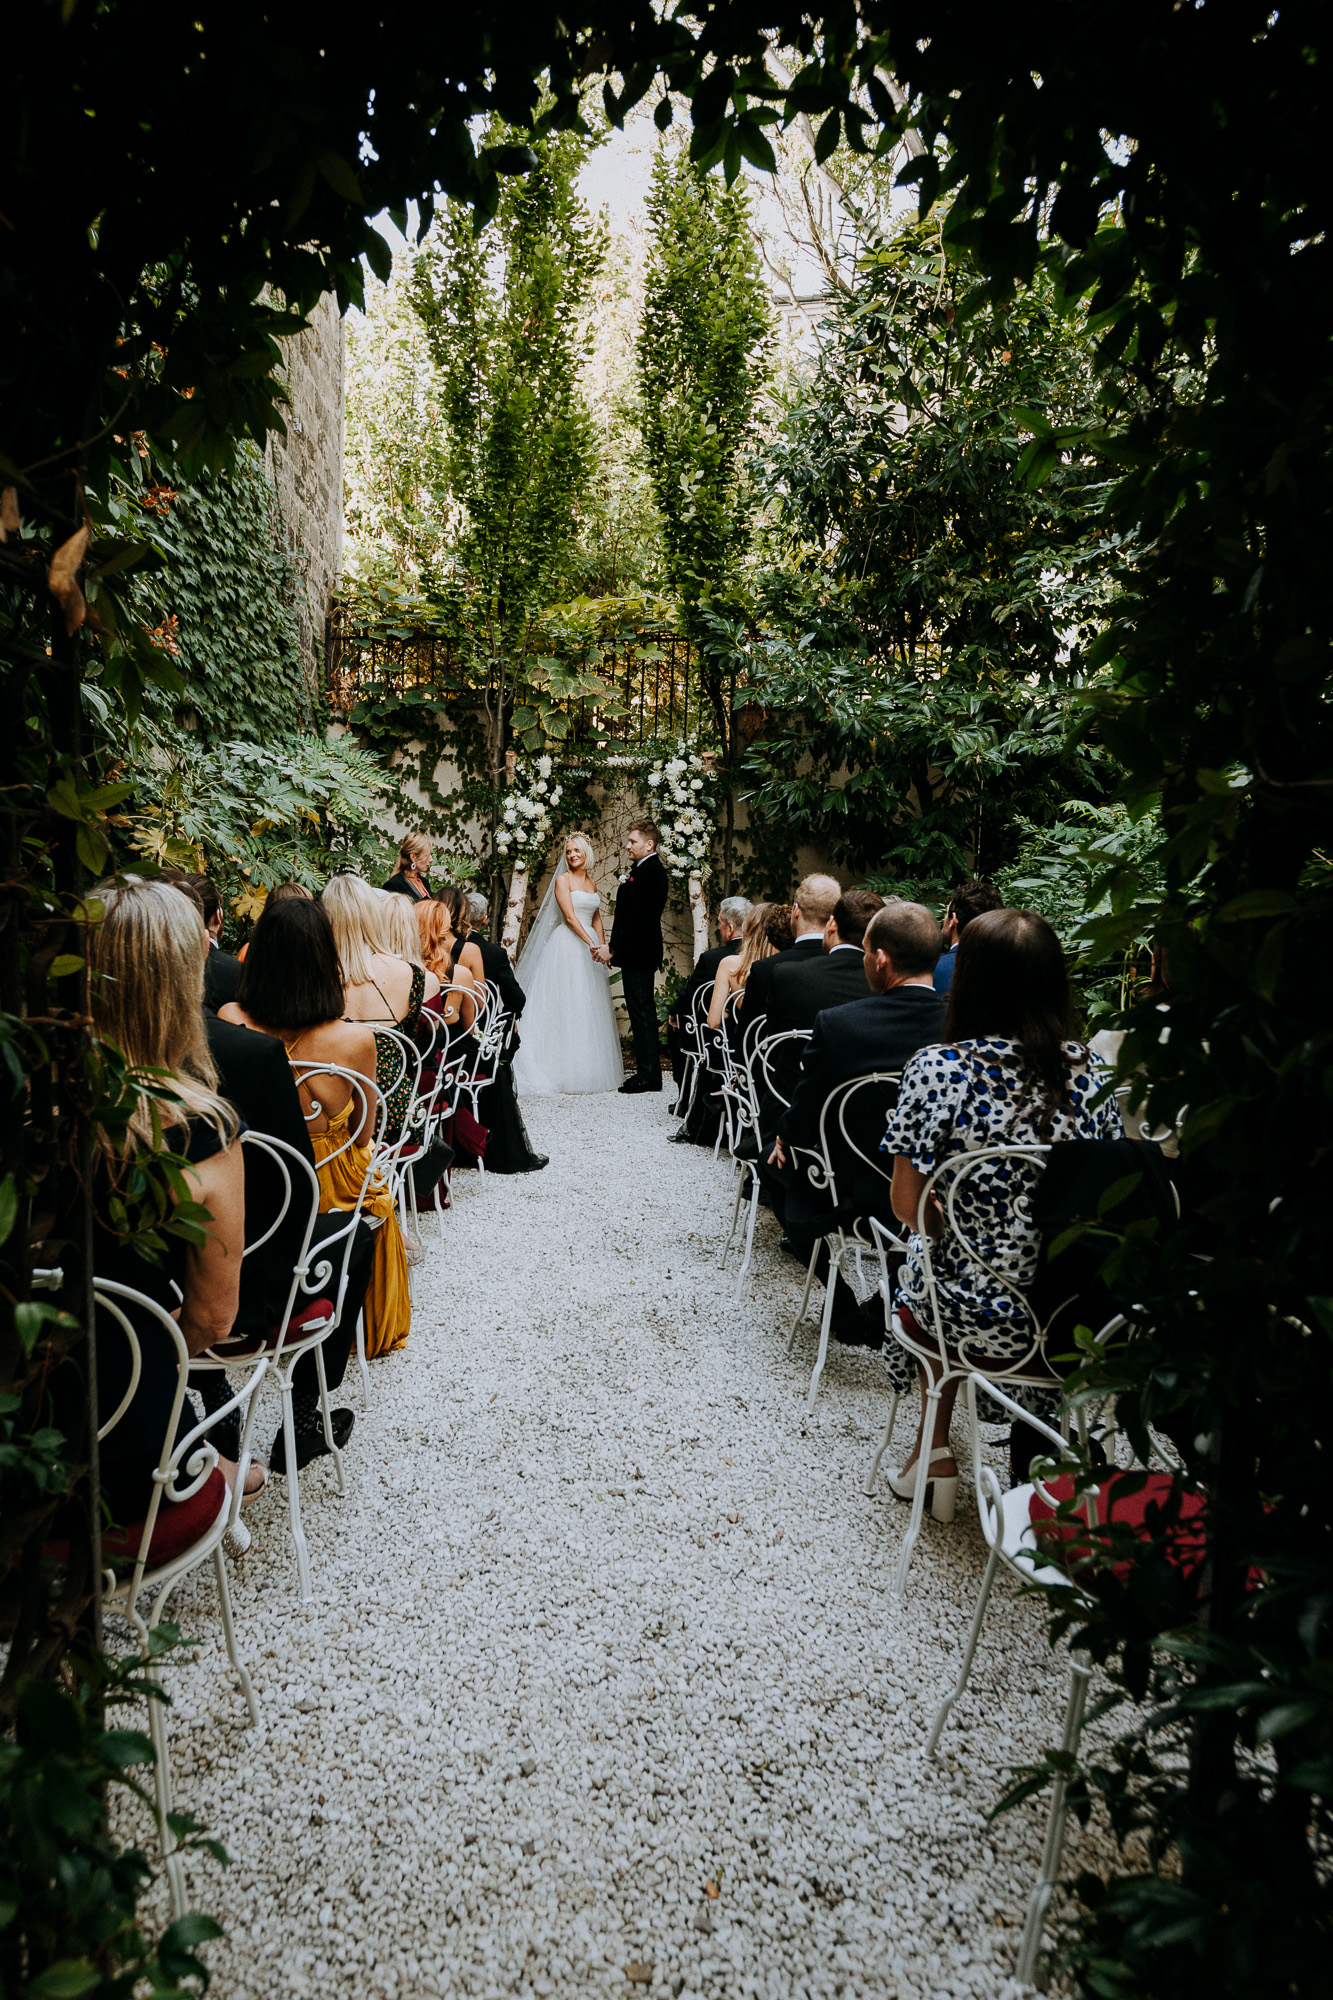 Paris wedding photographer: general view of the ceremony area of Hotel Particulier Montmartre, in Paris